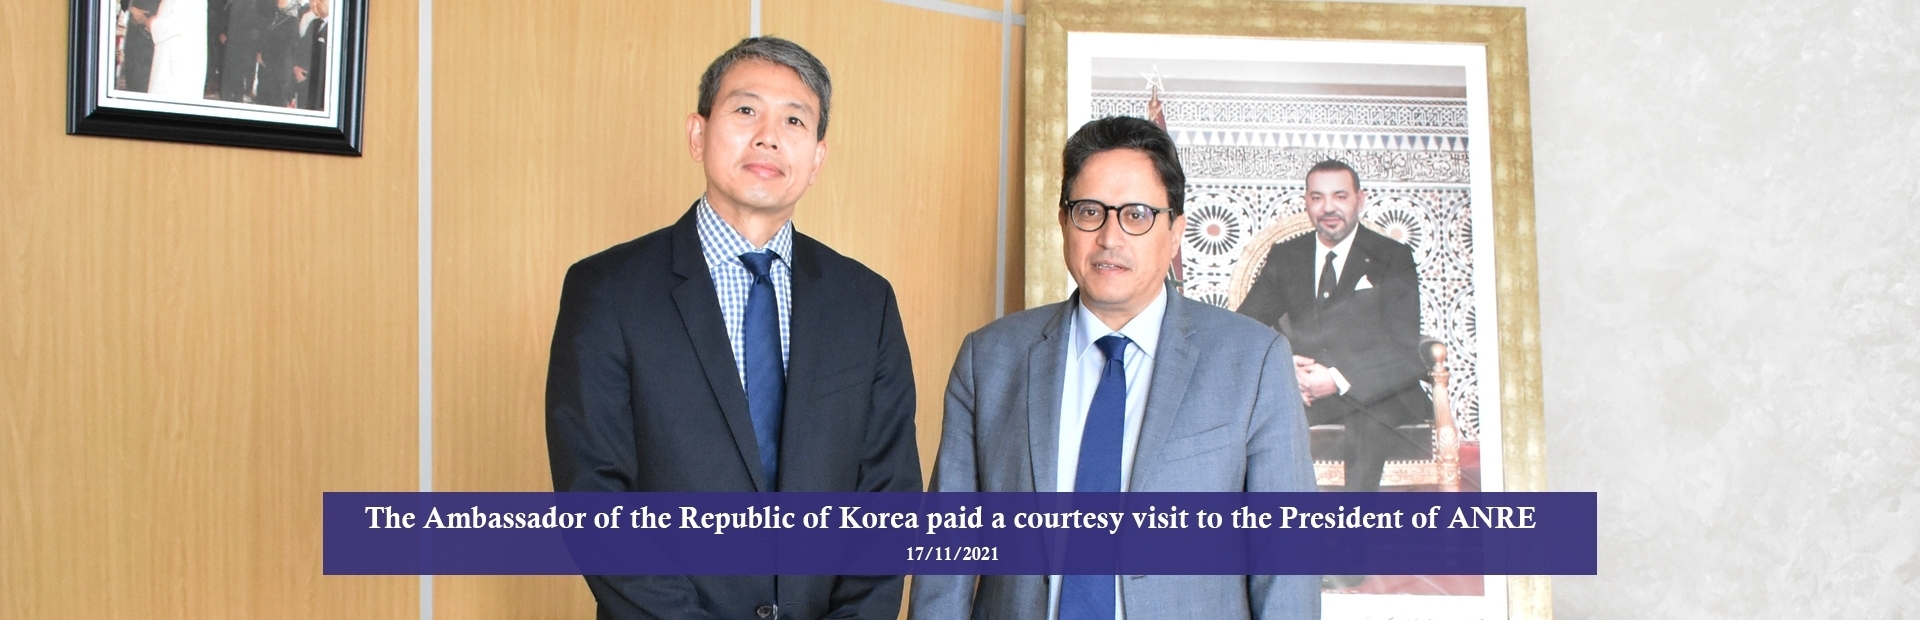 The Ambassador of the Republic of Korea paid a courtesy visit to the President of ANRE